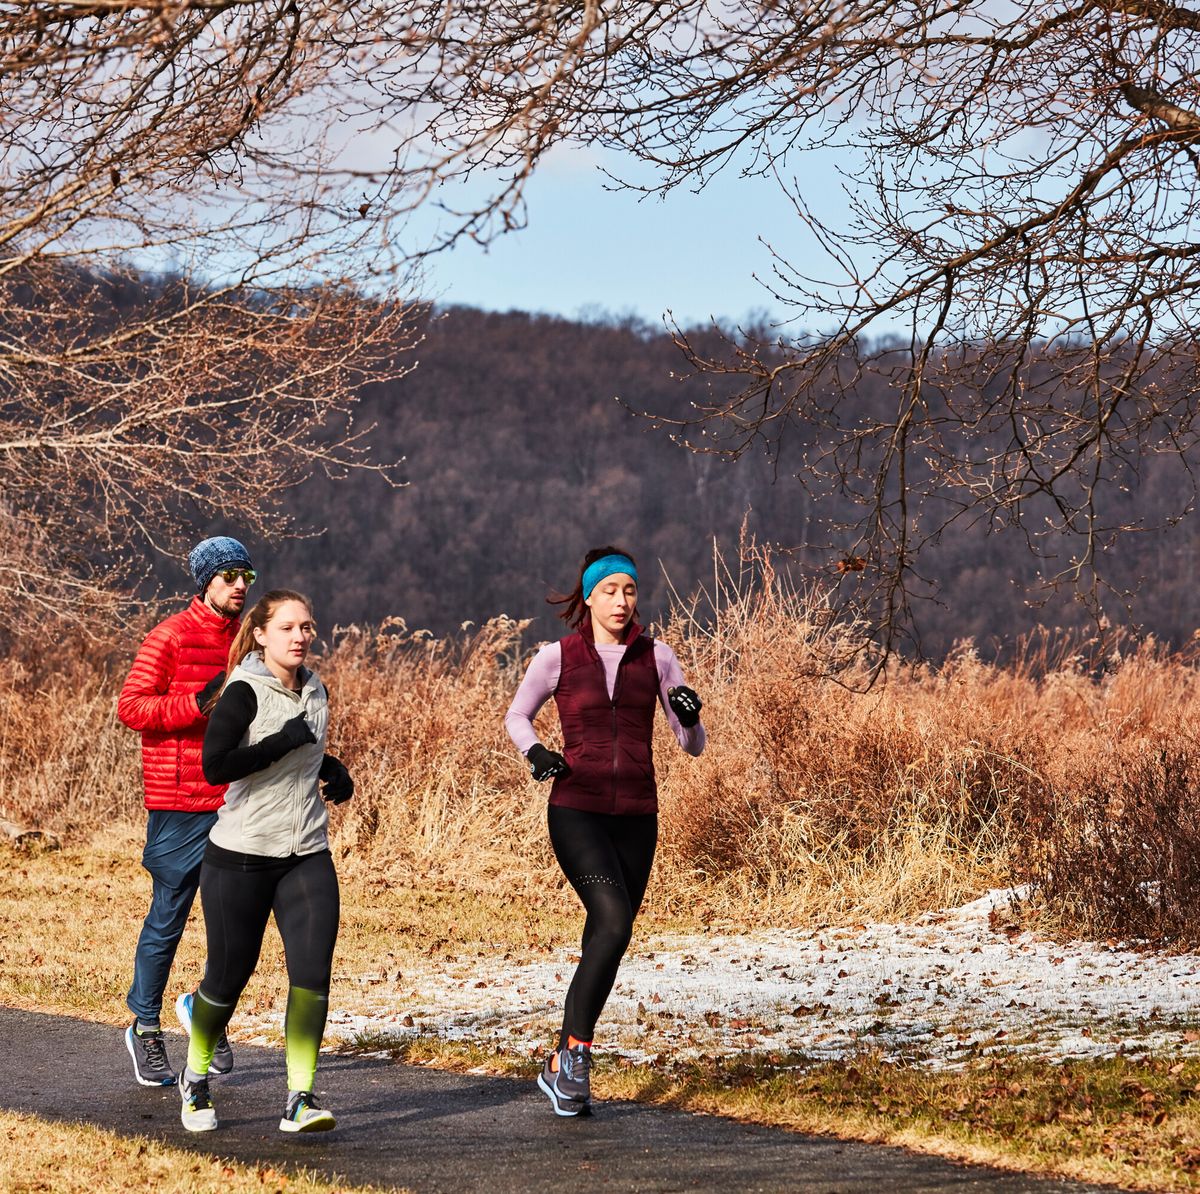 Best Winter Running Gear for Working Out in the Cold